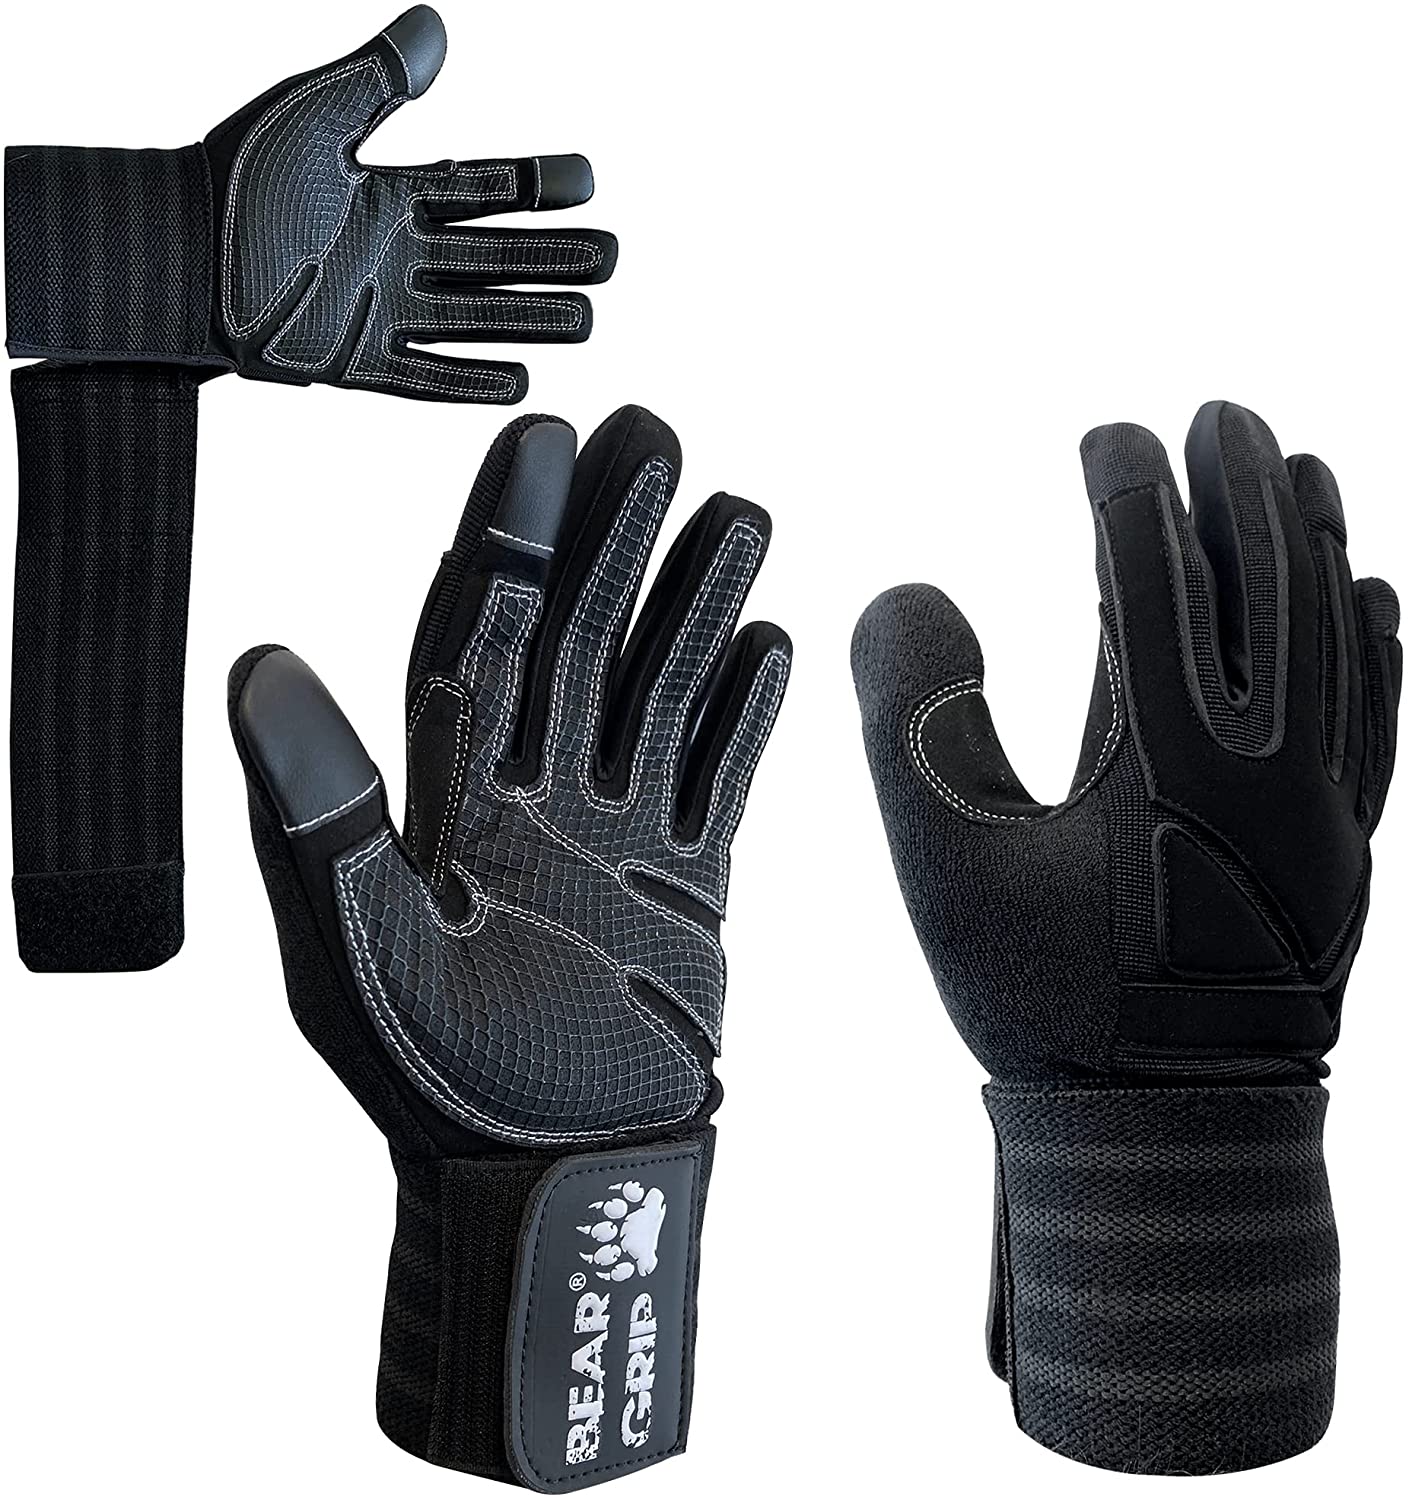 BEAR GRIP - Weight Lifting Gloves with Gel Padded Palms and Wrist Support